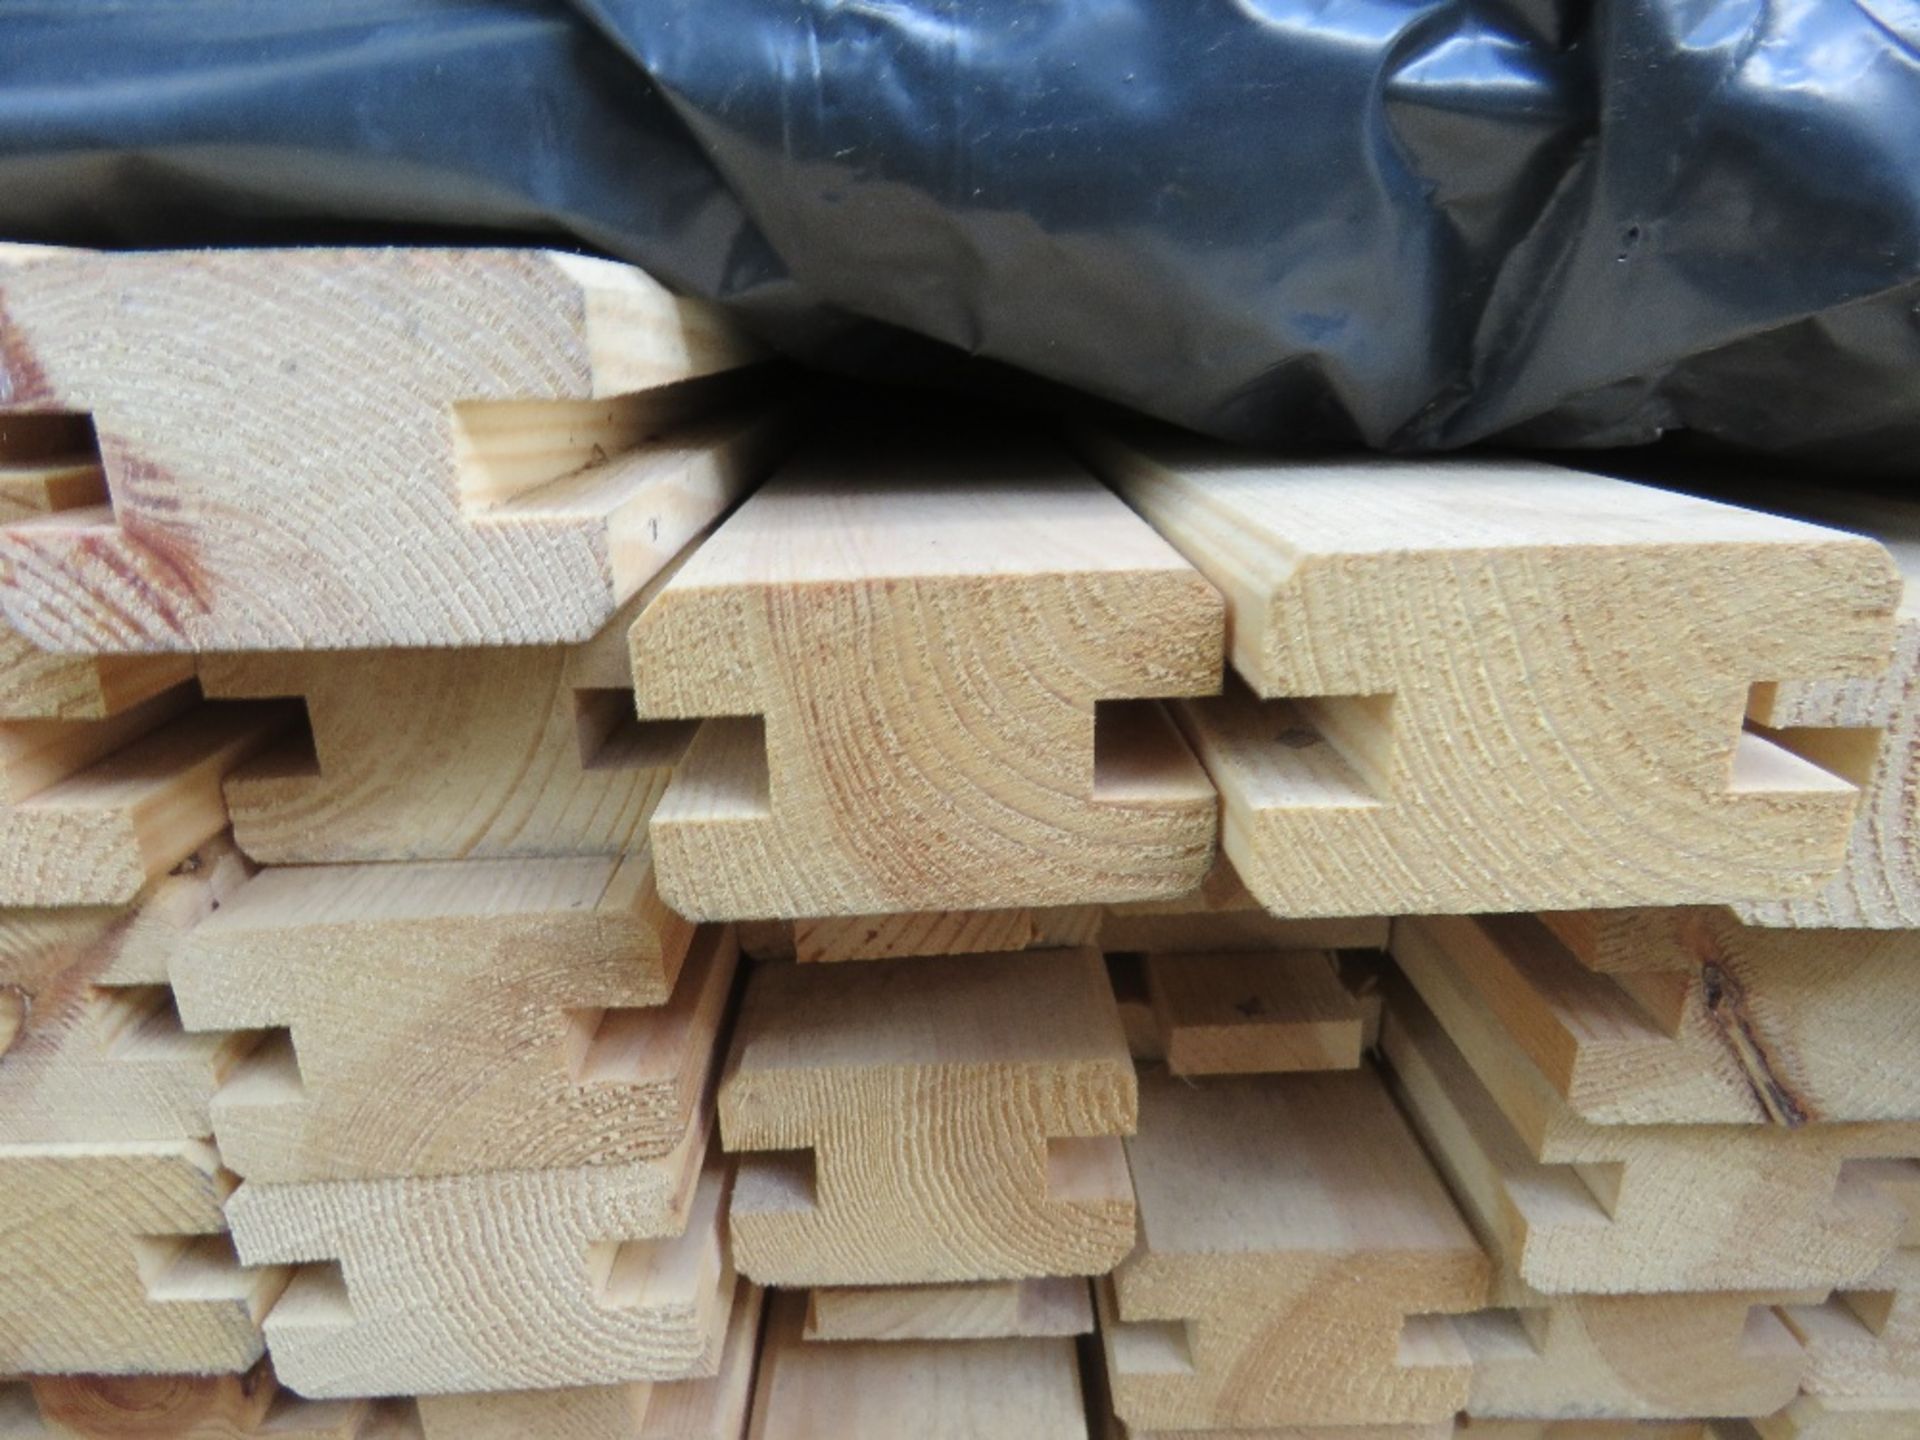 PACK OF H SECTIONED CONSTRUCTION TIMBER, UNTREATED. SIZE: 1.70M LENGTH X 55MM WIDE X 35MM DEPTH APPR - Image 2 of 3